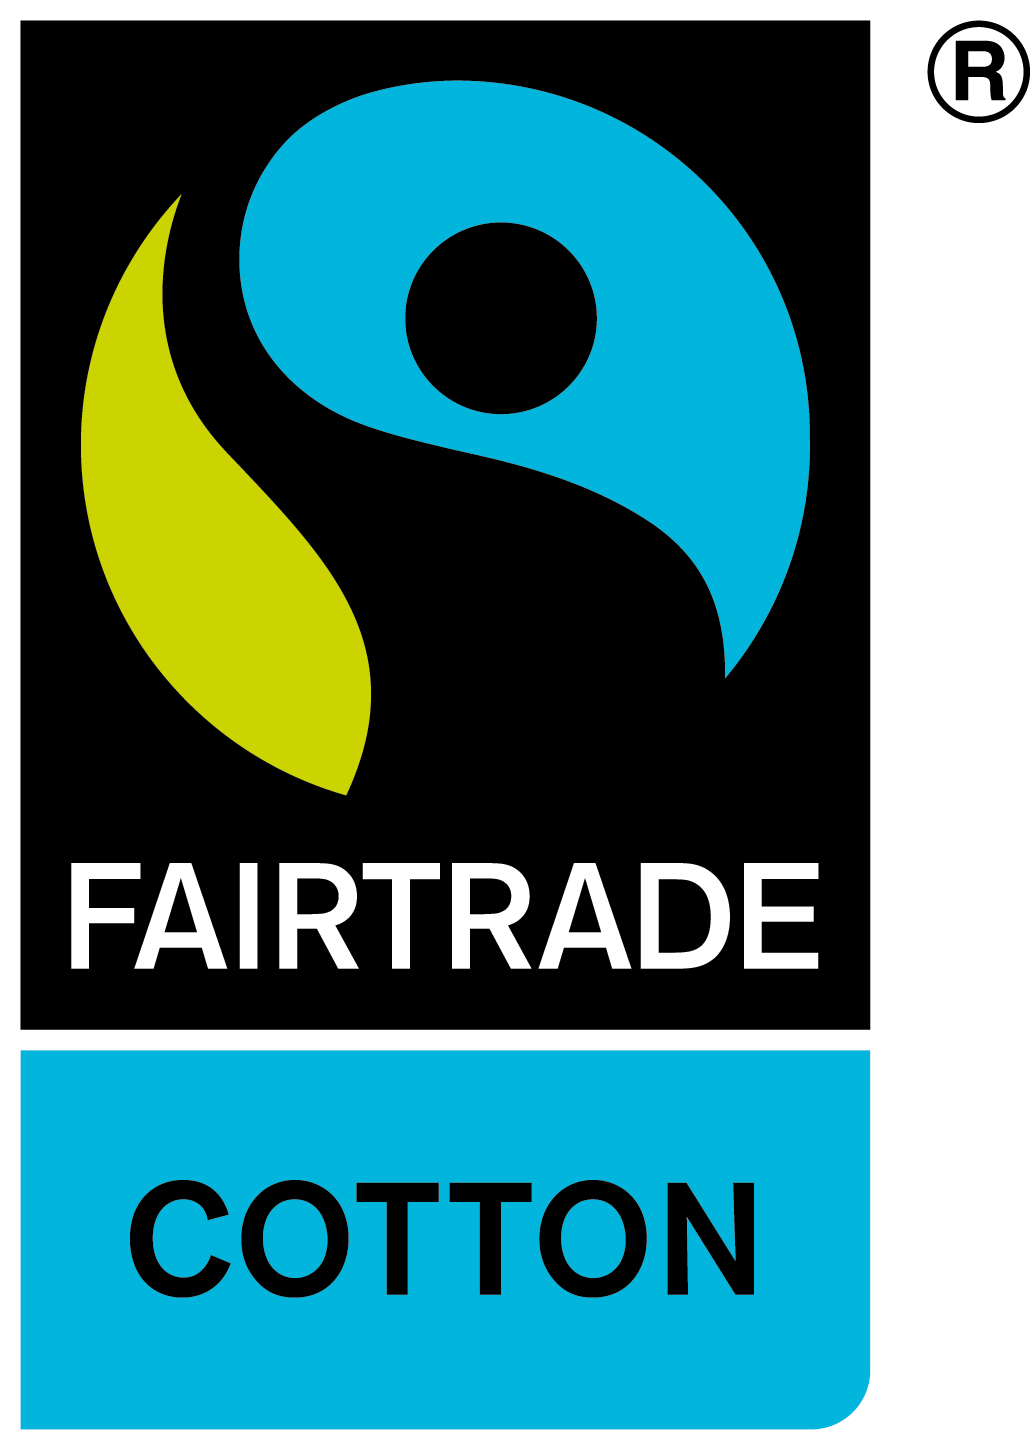 Look for the Fairtrade Cotton Mark on our products www.fairtrade.org.uk